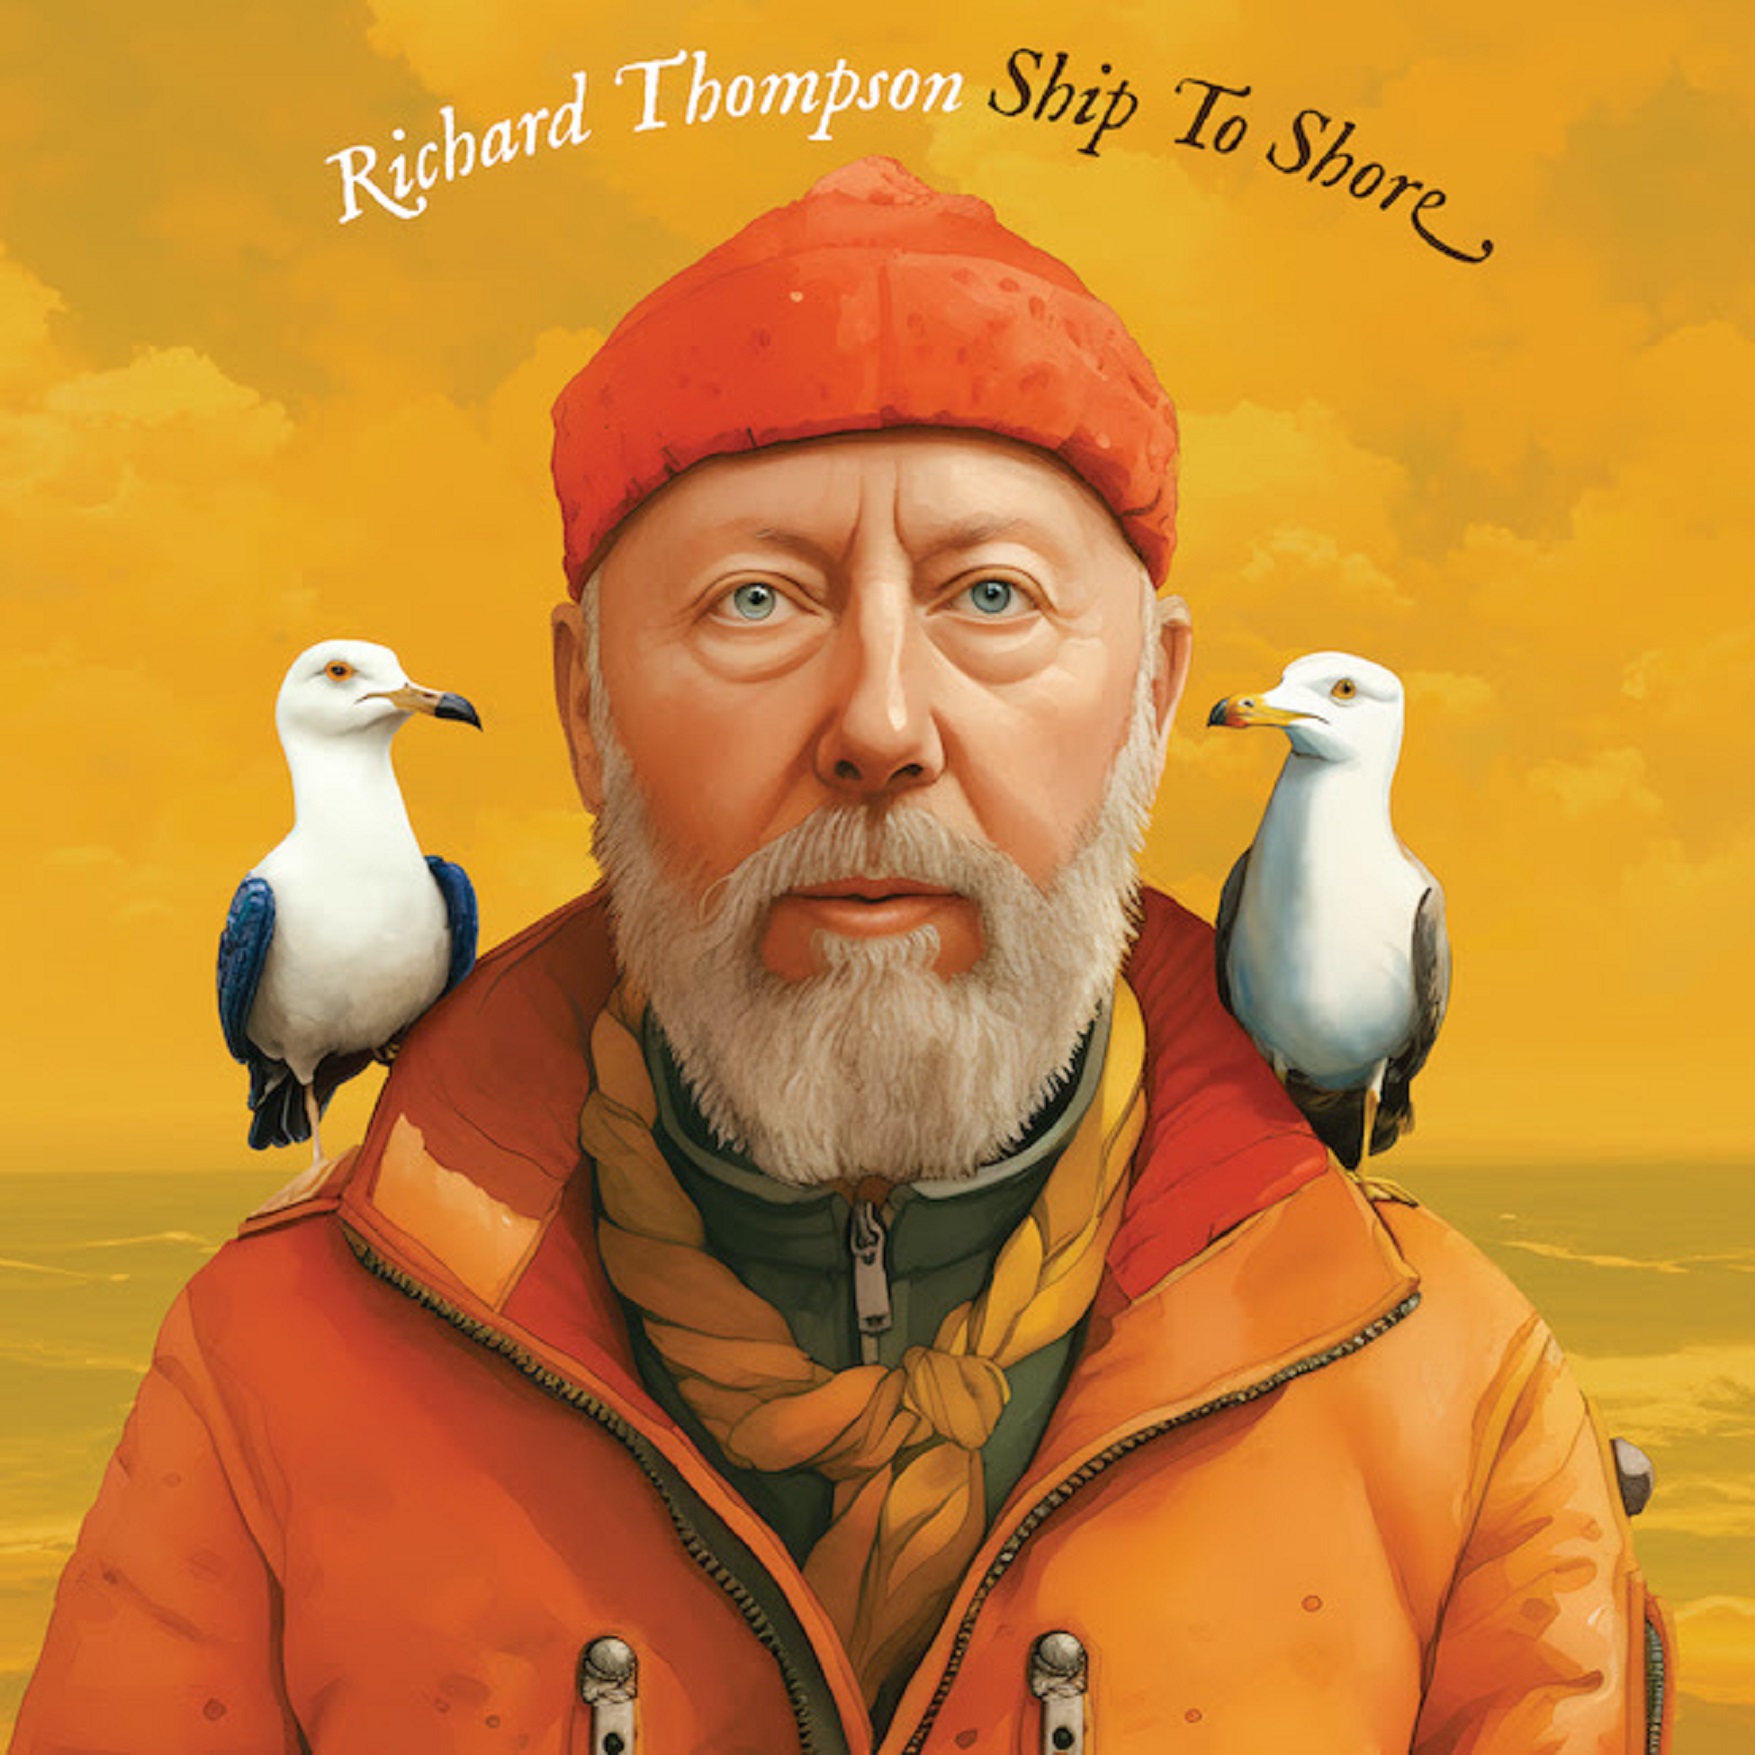 Richard Thompson Announces North American Full Band Tour Dates - "Ship To Shore" Out Now